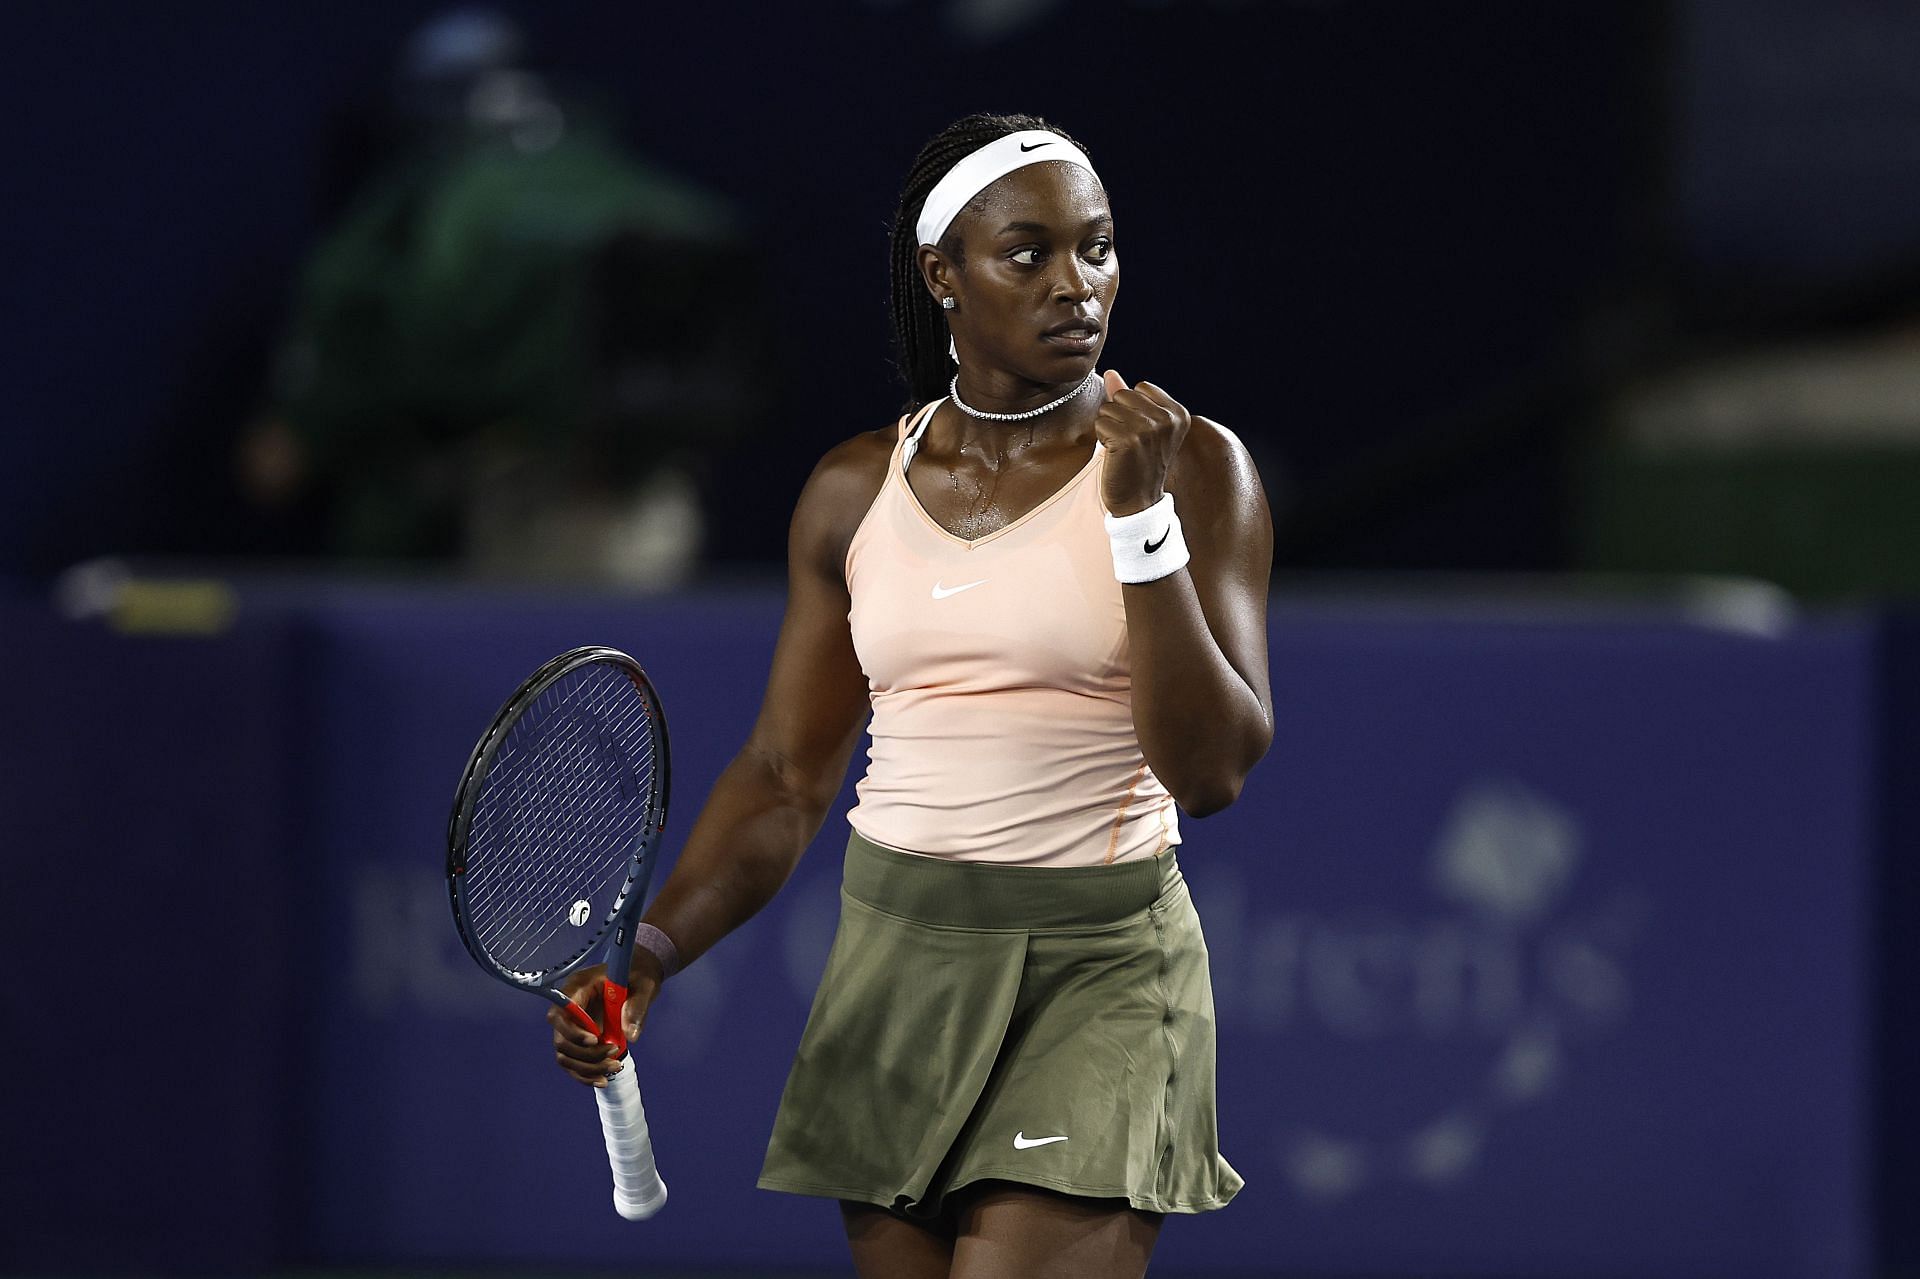 Sloane Stephens is seeded fifth at the ATX Open.